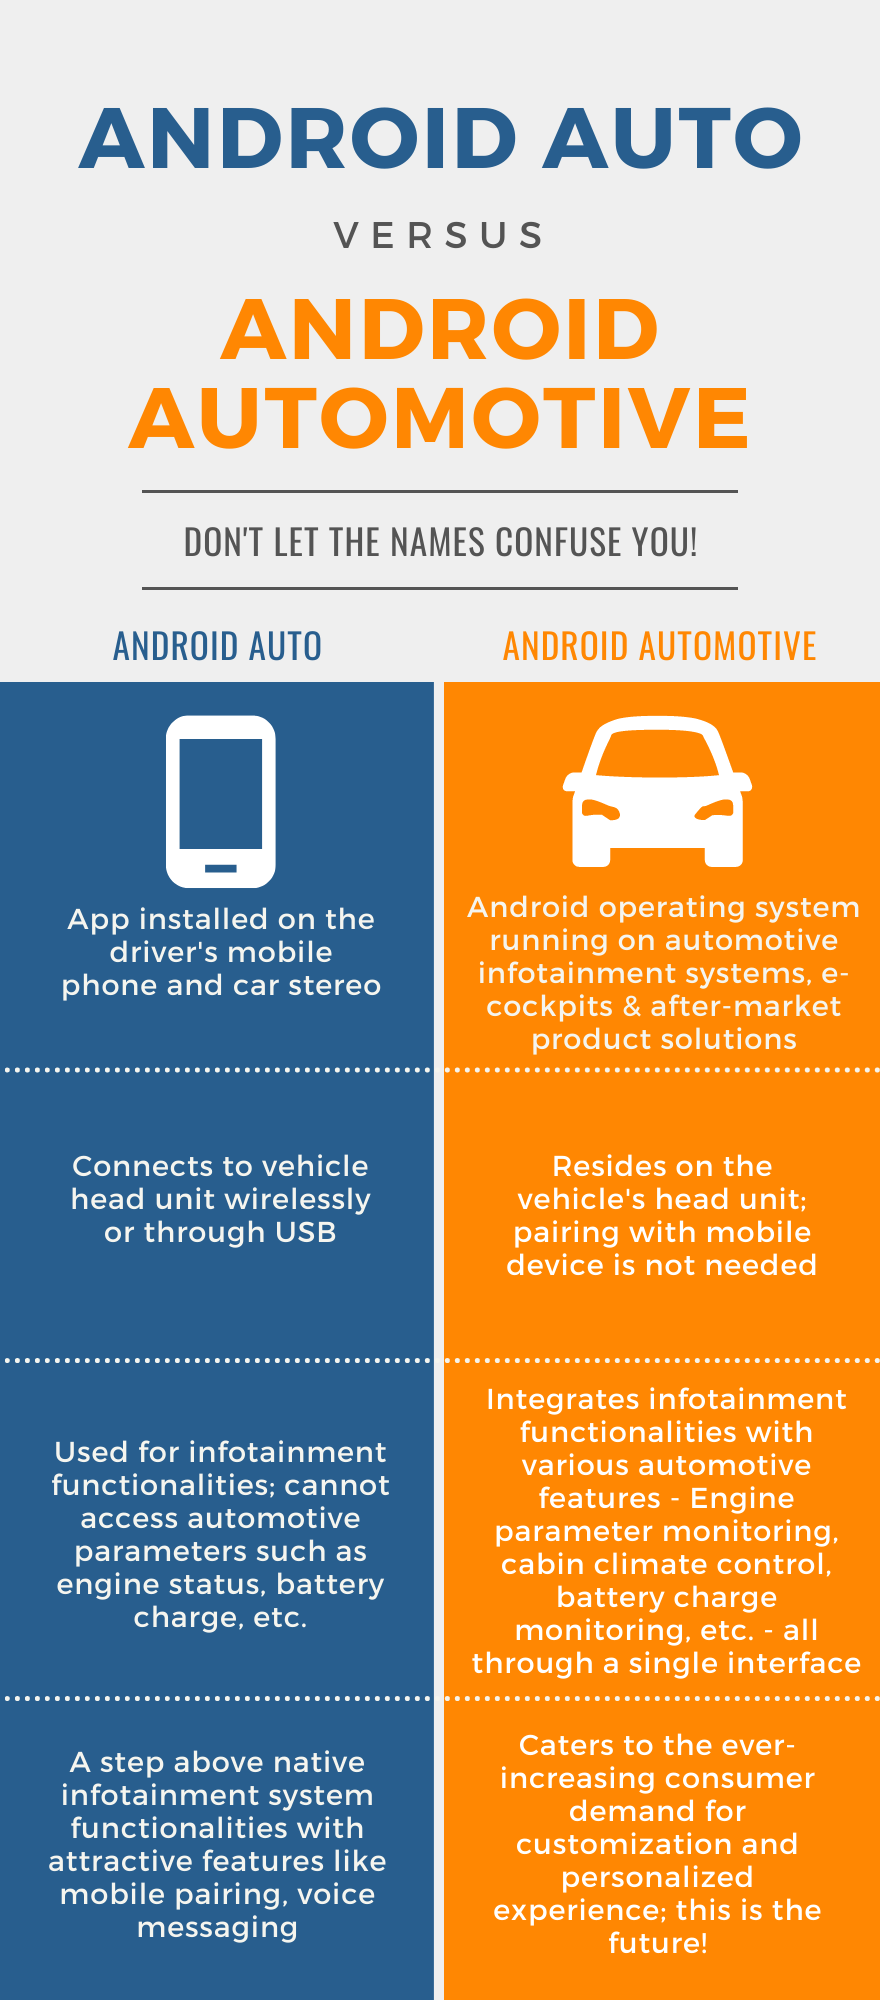 Android Auto versus Android Automotive infographic